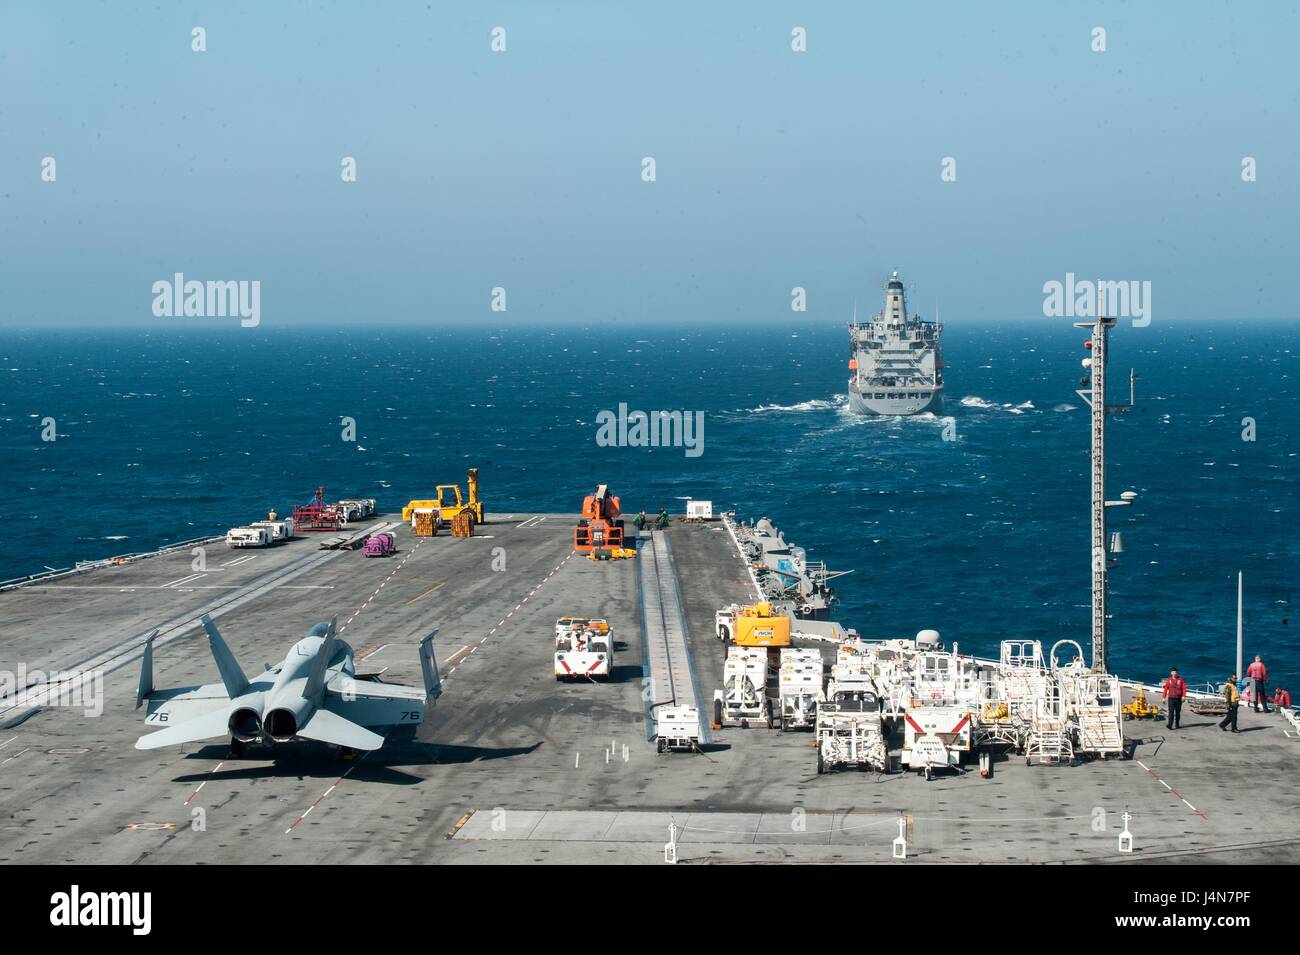 The U.S. Navy forward-deployed nuclear aircraft carrier  USS Ronald Reagan approaches the Military Sealift Command fleet replenishment oiler USNS John Ericsson  to conduct a fueling-at-sea May 11, 2017 in the Sea of Japan. Stock Photo